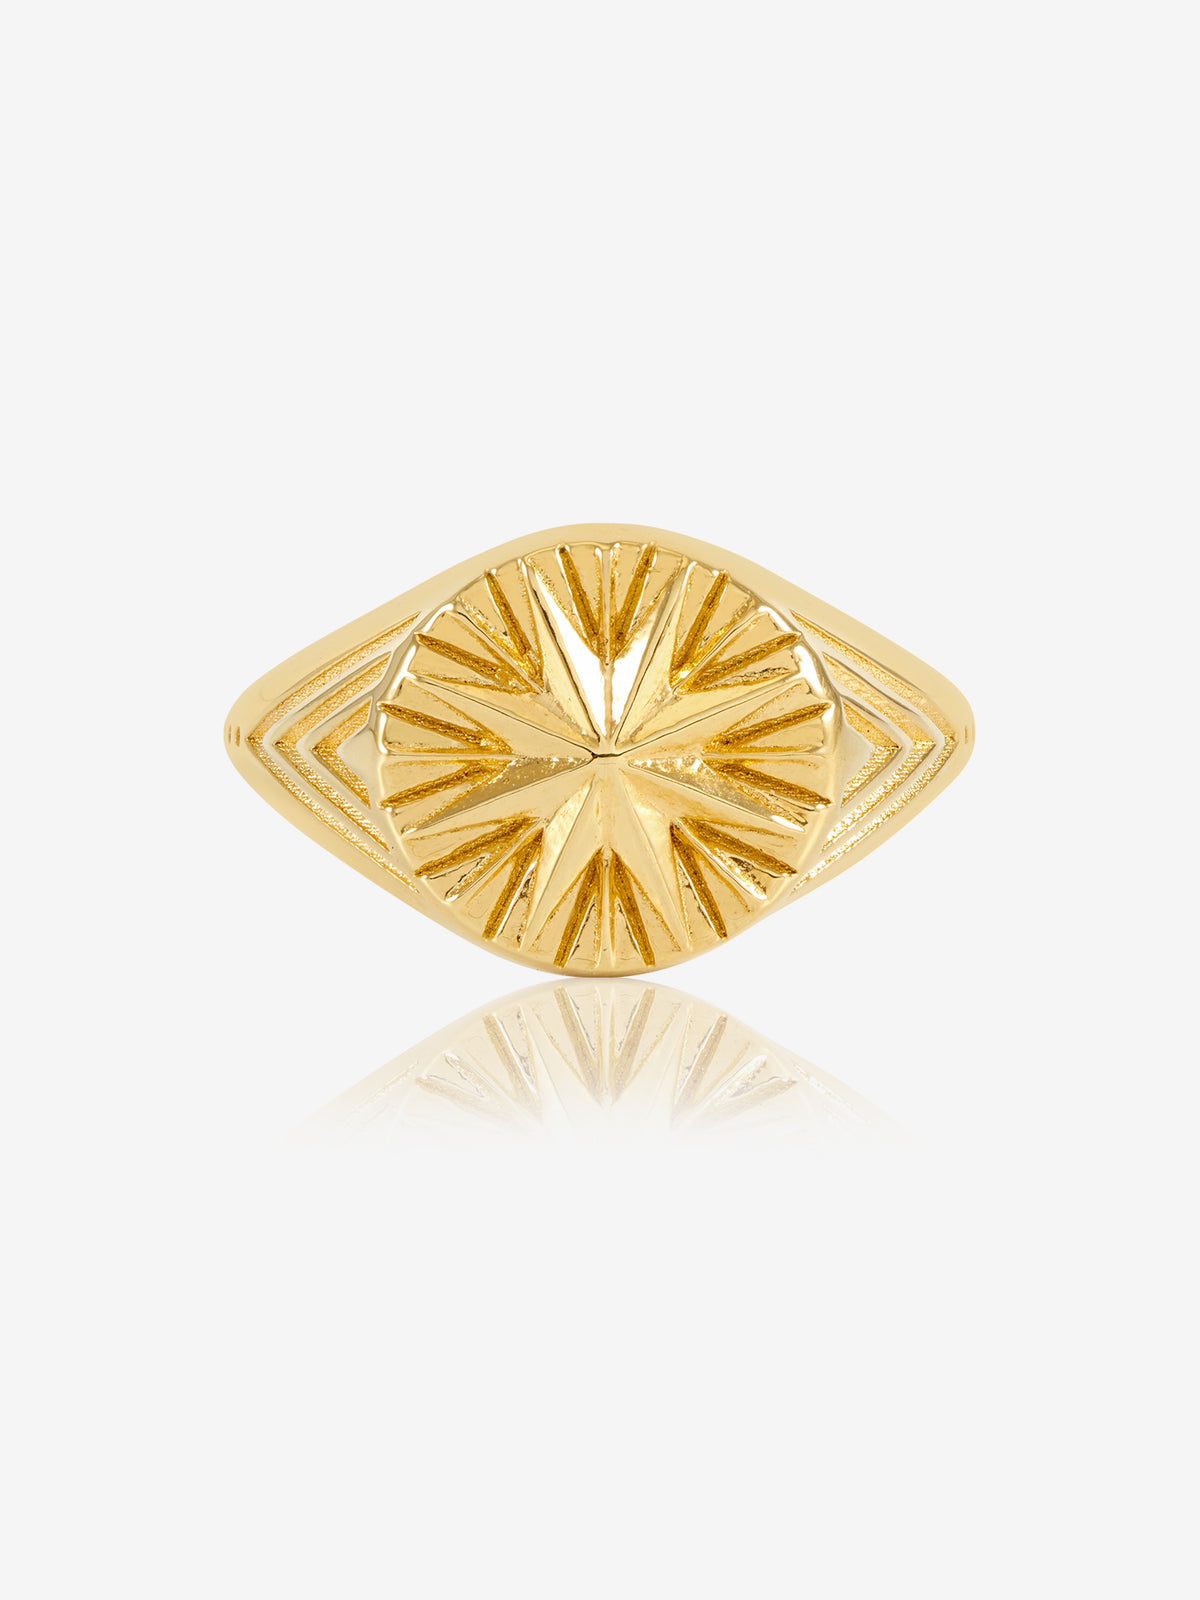 North Star Pinky Signet Ring